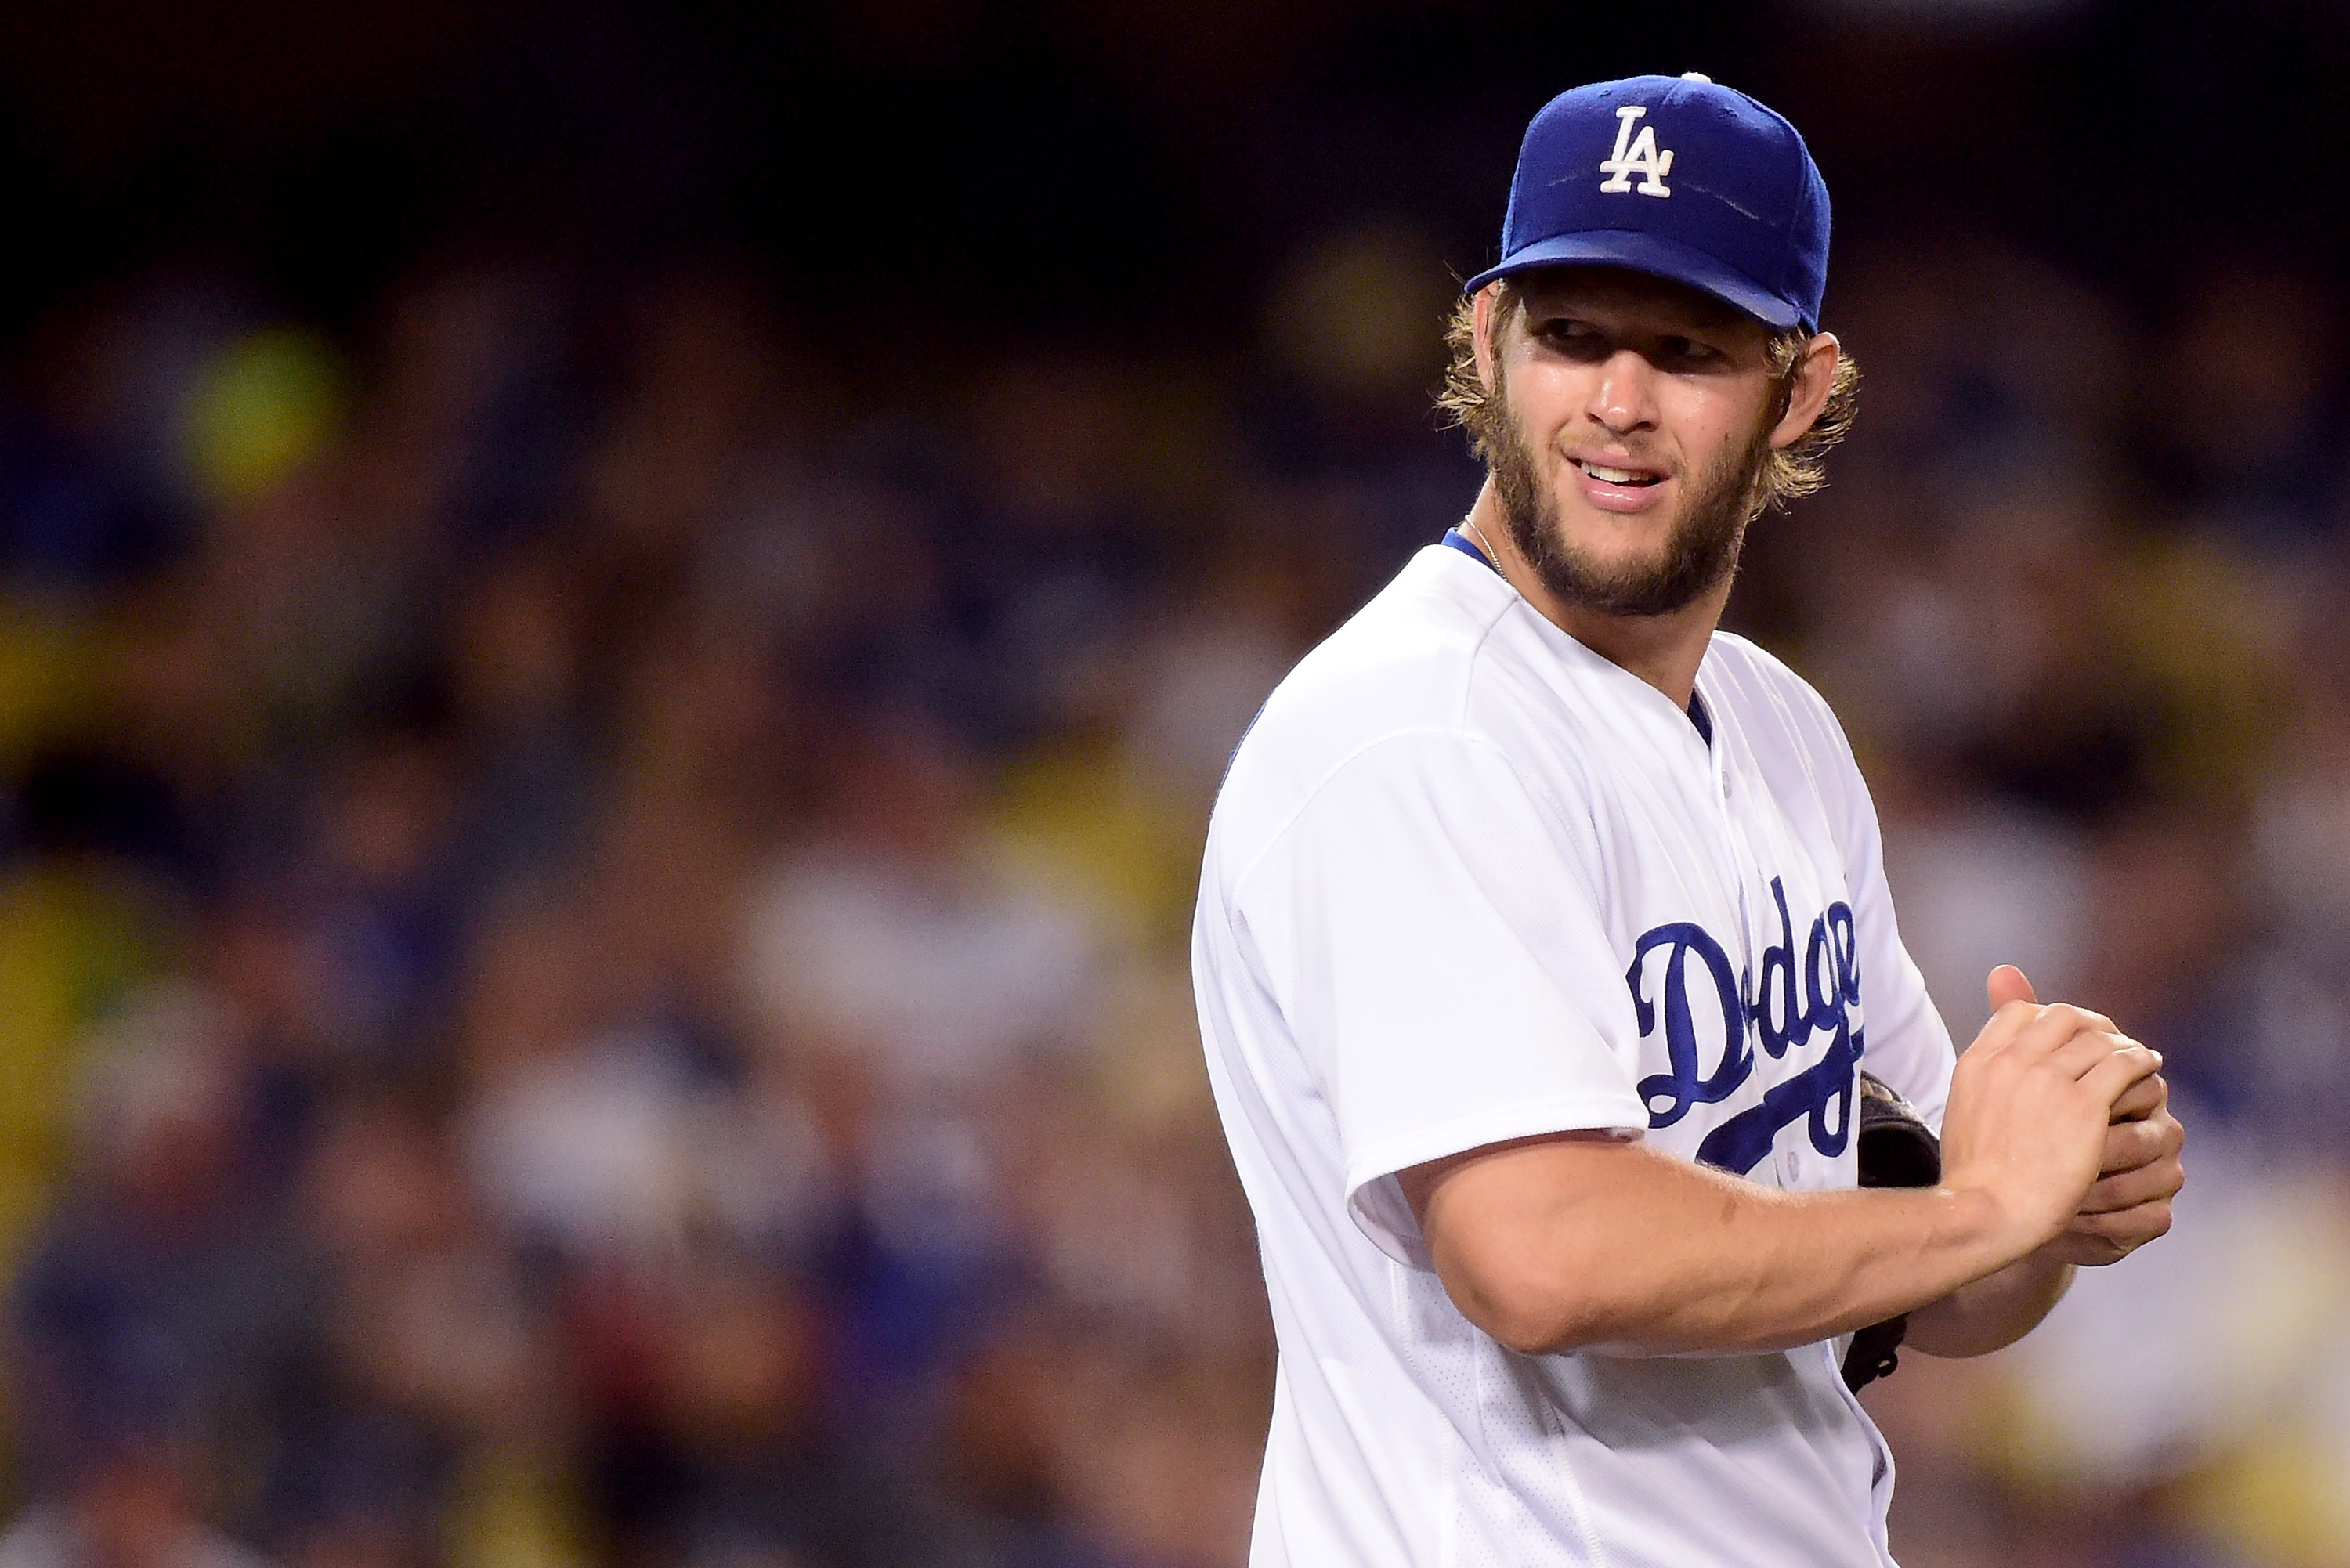 Plaschke: Clayton Kershaw is back, and so are the Dodgers' World